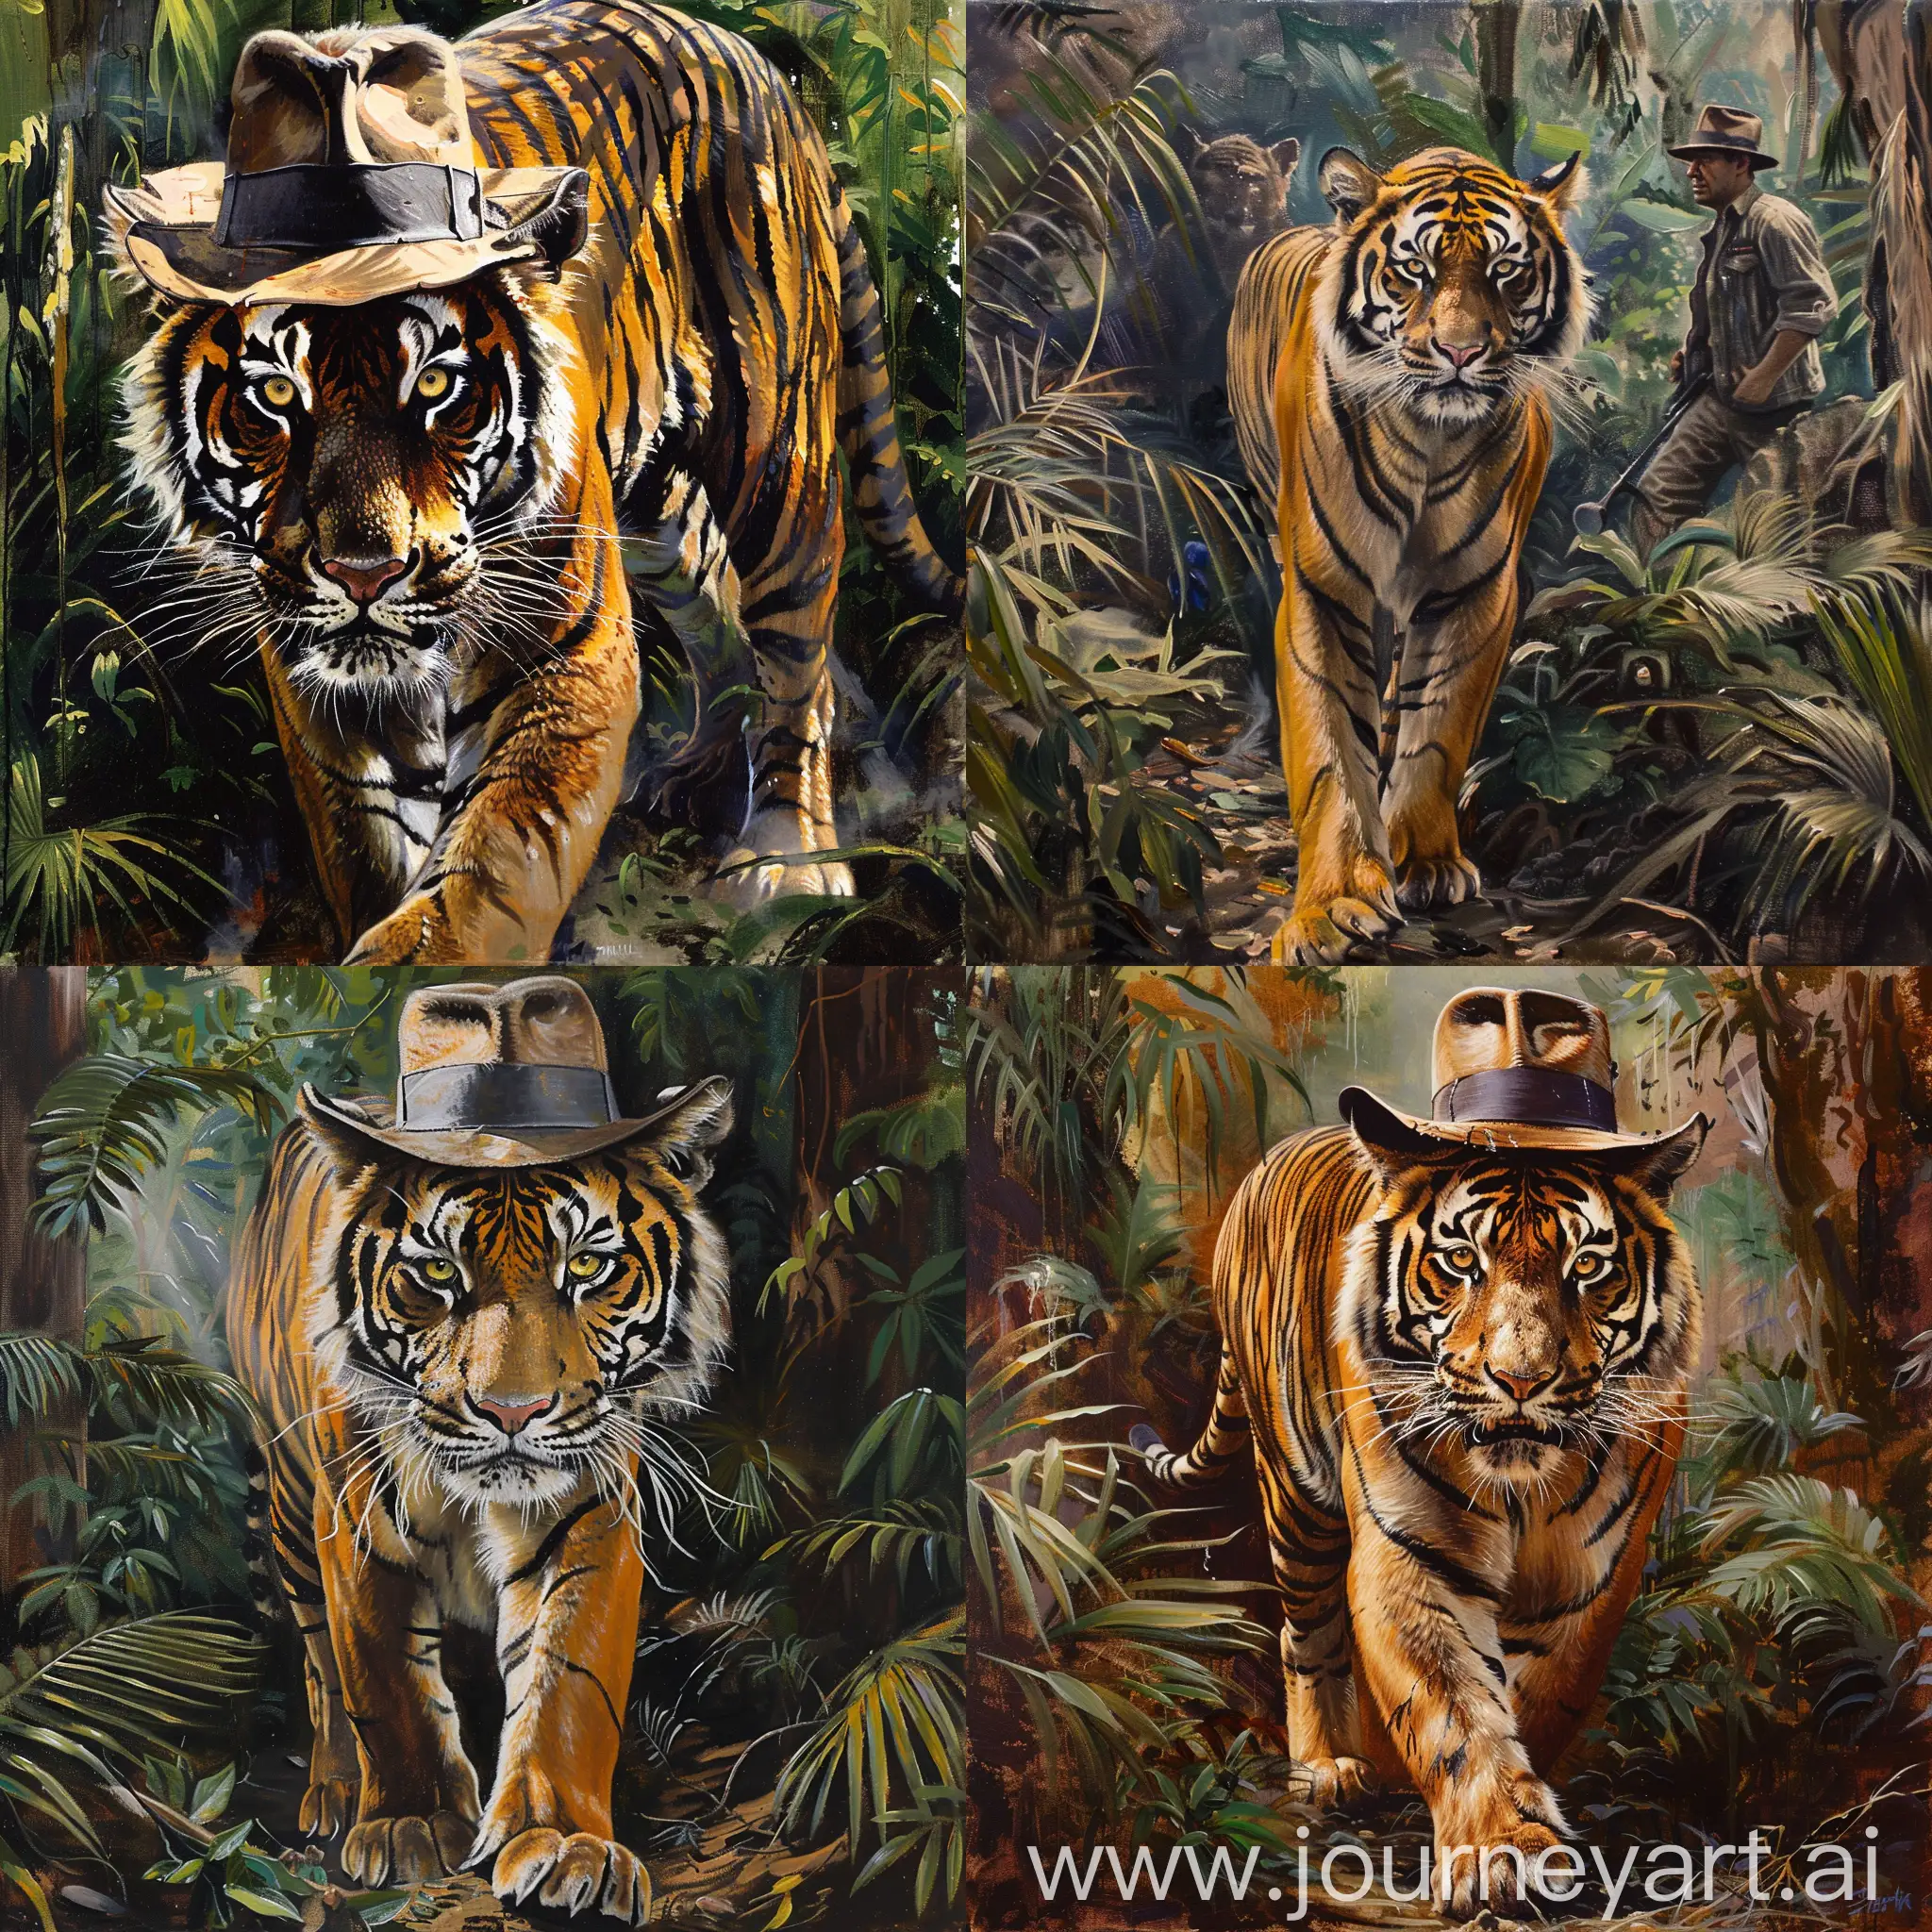 Realistic-Tiger-in-Jungle-Pursued-by-Indiana-Jones